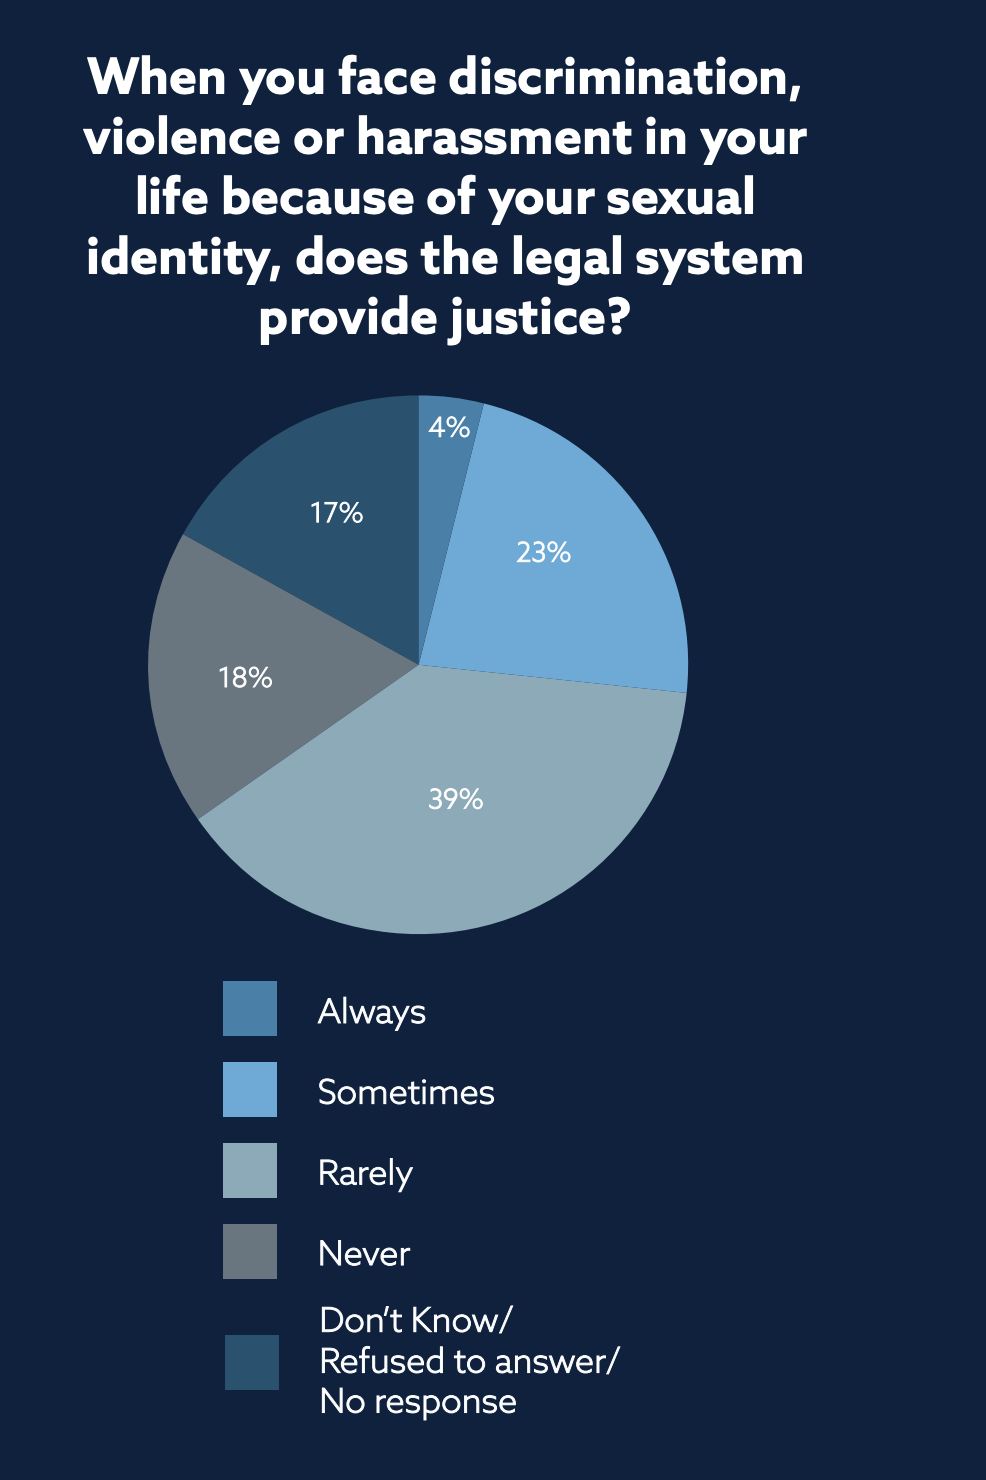 When you face discrimination, violence or harassment in your life because of your sexual identity, does the legal system provide justice?  A pie chart showing: Always 4%; Sometimes 23%; Rarely 39%; Never 18%; Don't know/refused to answer 17%.